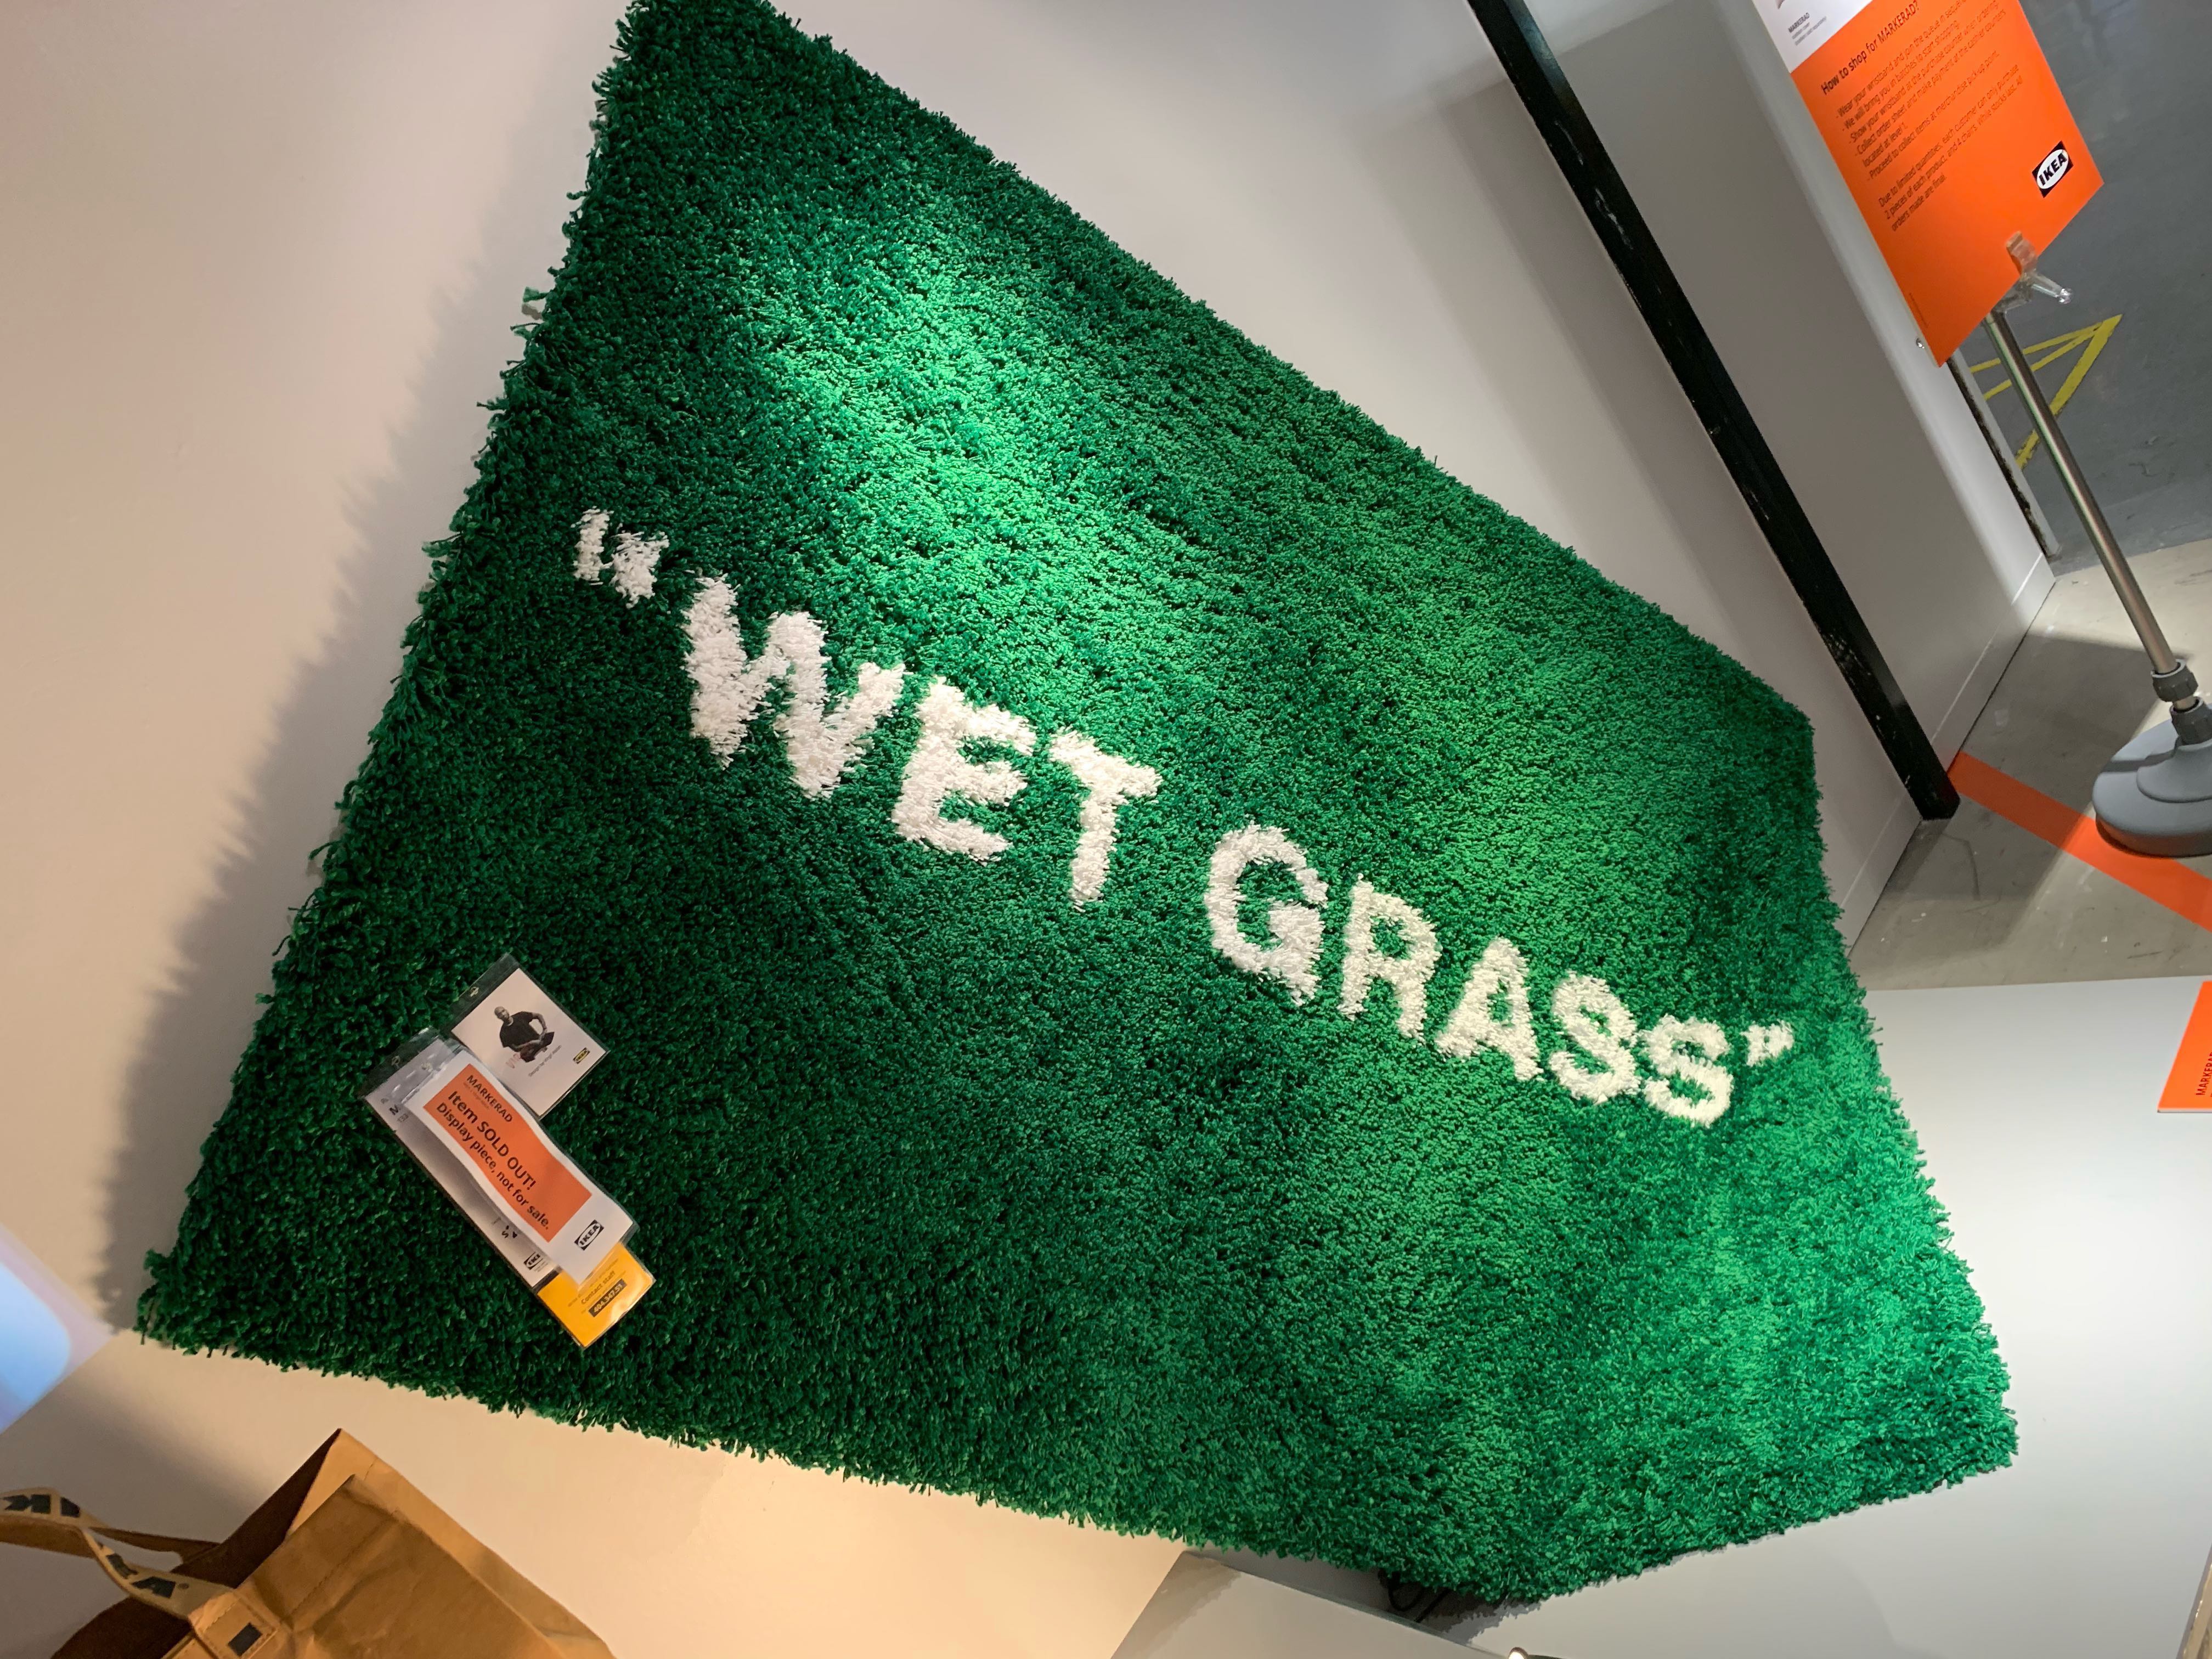 Virgil Abloh Ikea Markerad collabo Wet Grass Rug Green Limited Edition